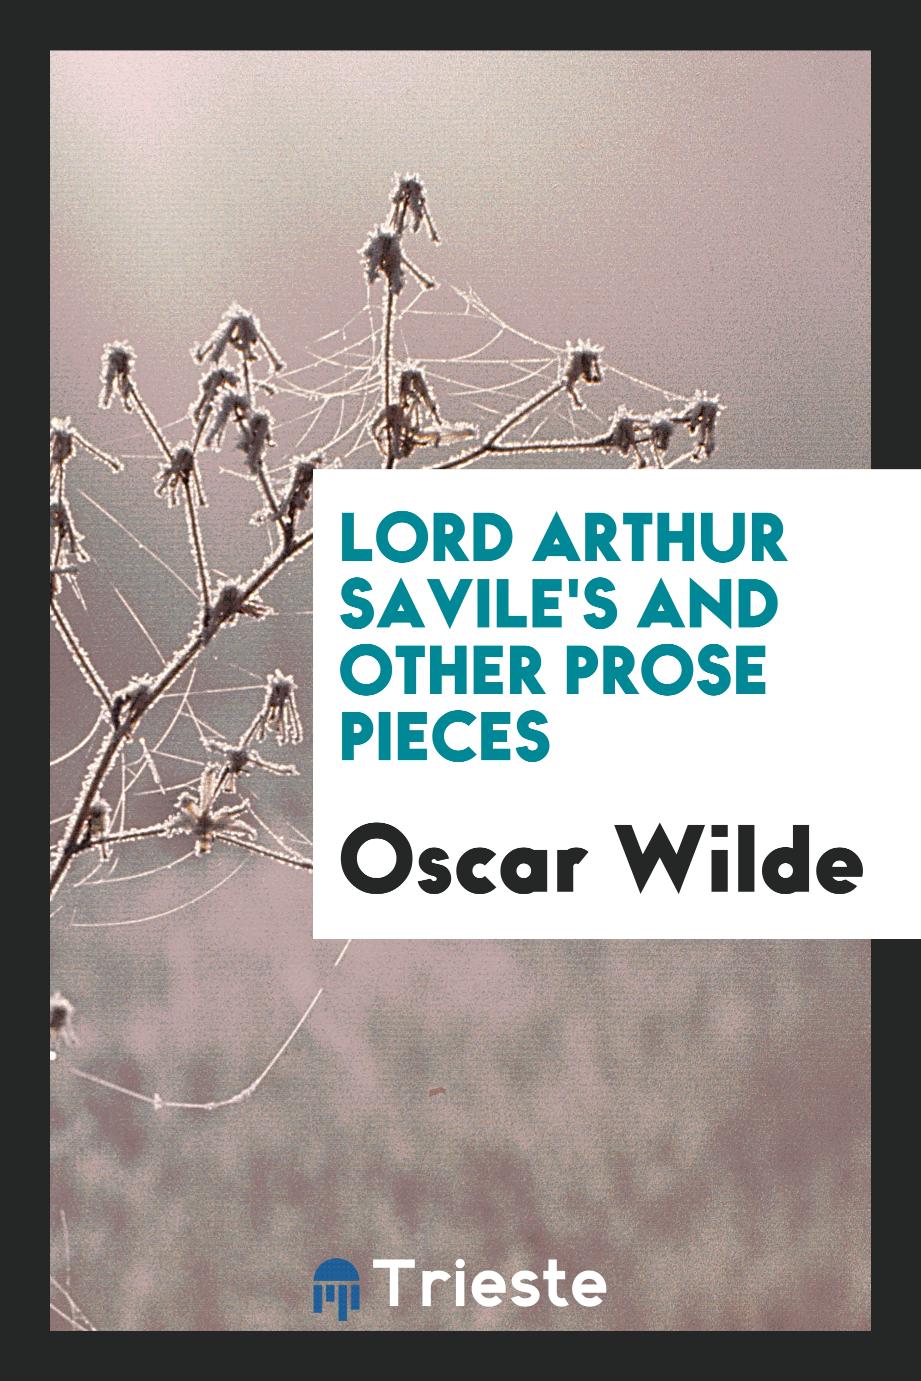 Lord Arthur Savile's and other prose pieces